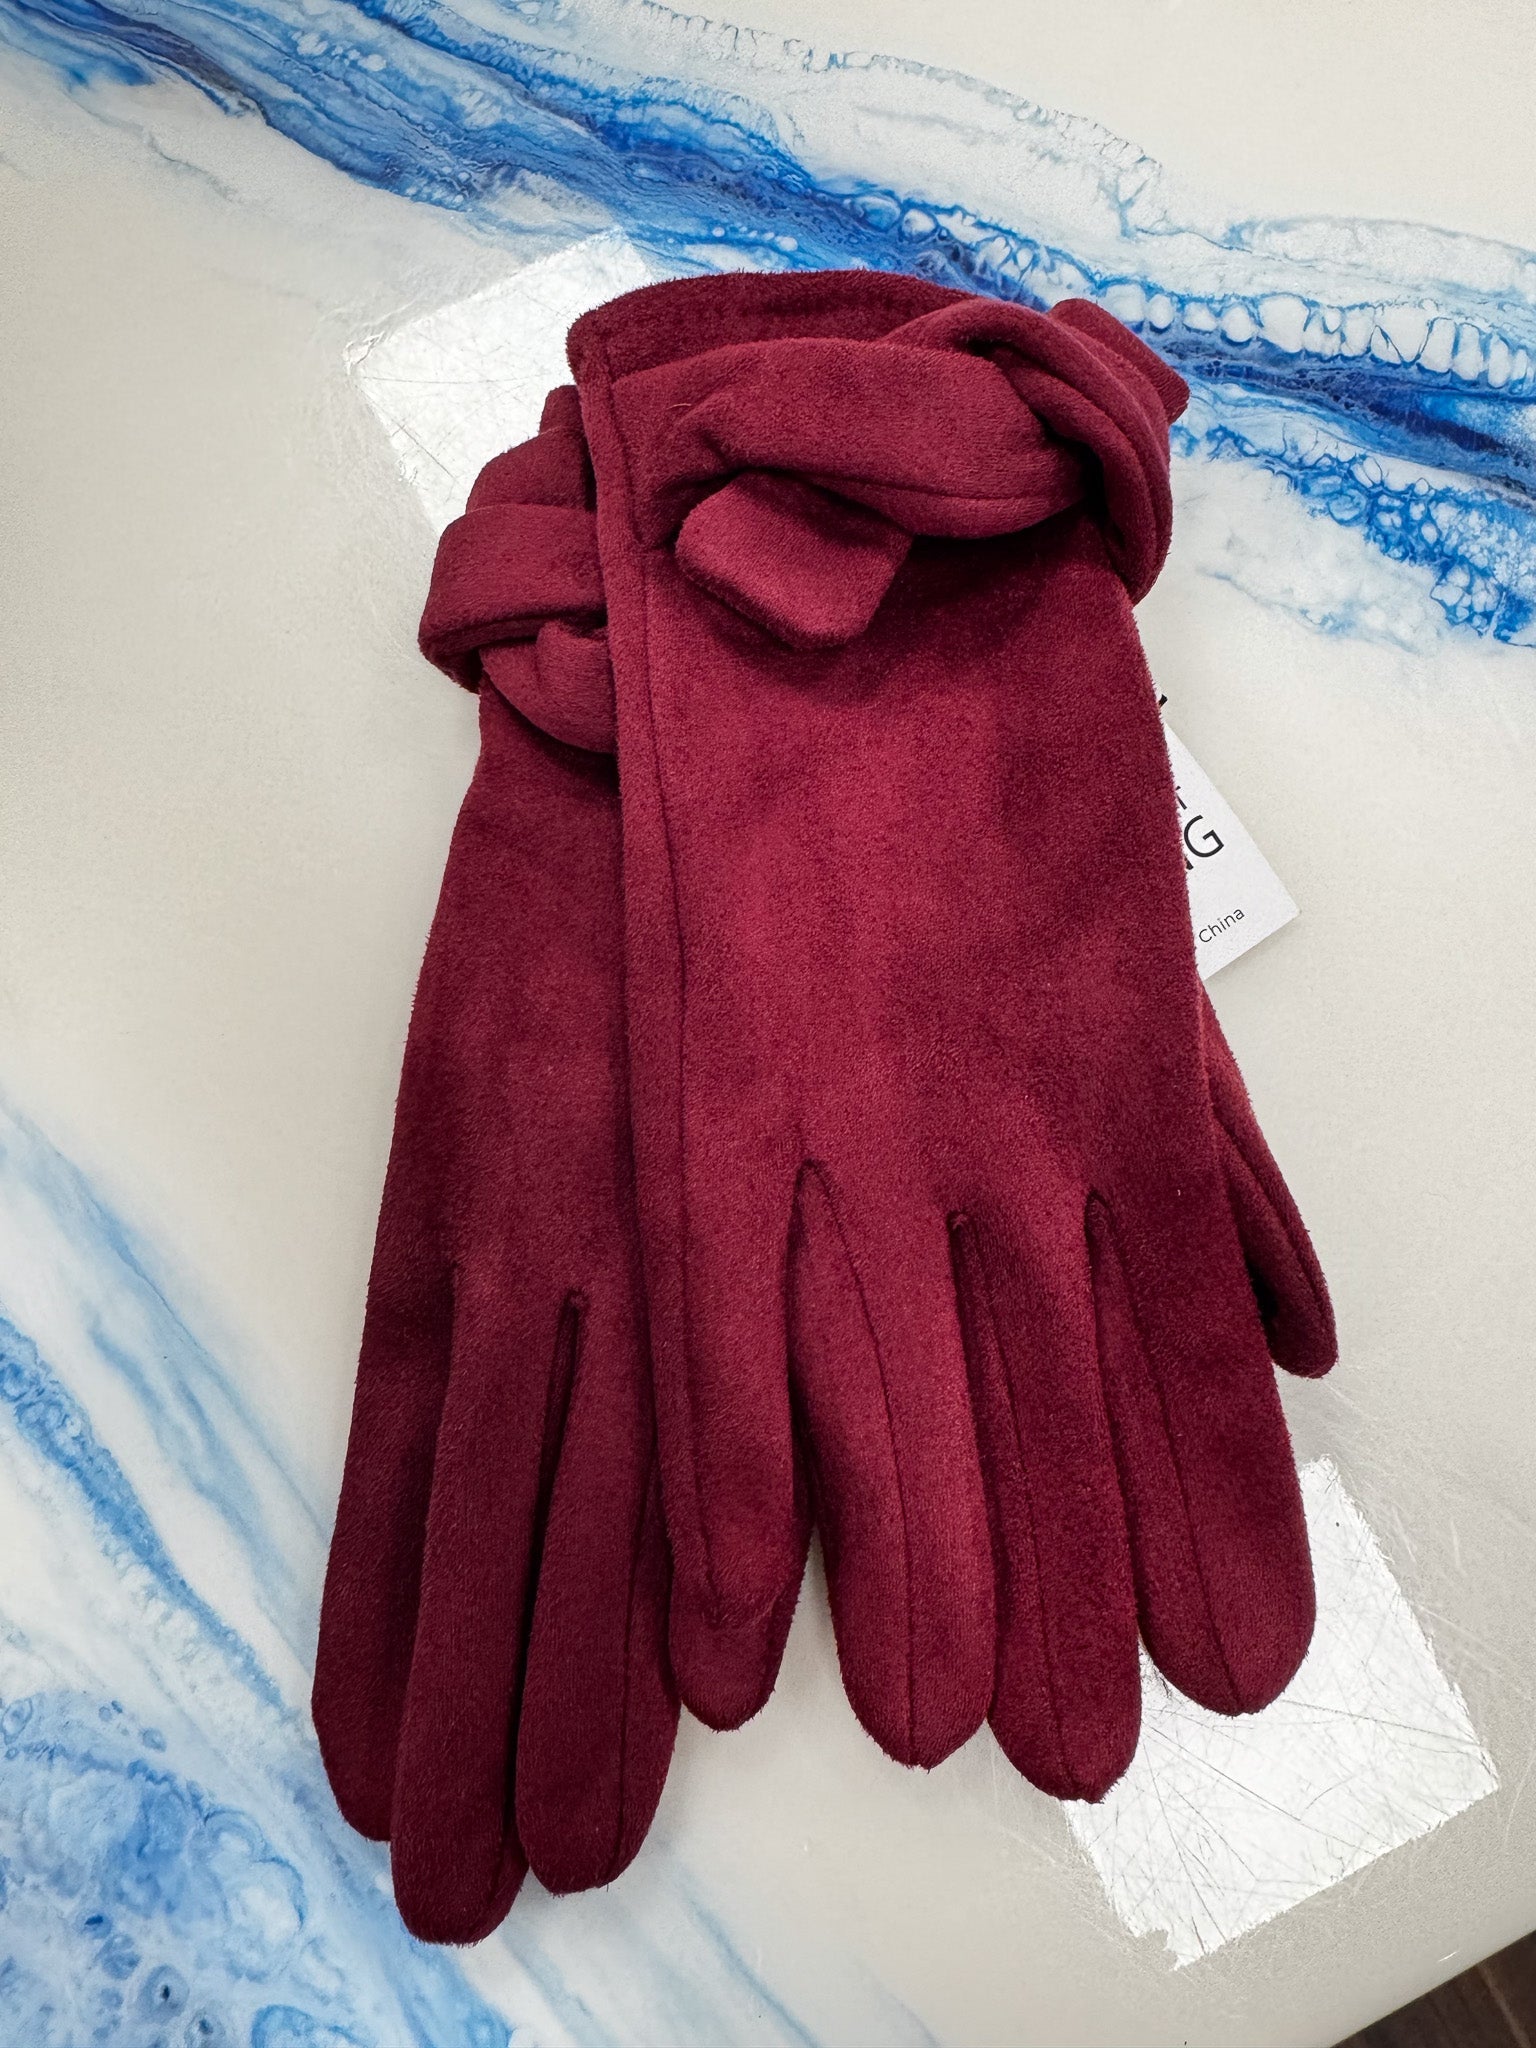 Microsuede Tie Gloves - So &amp; Sew Boutique